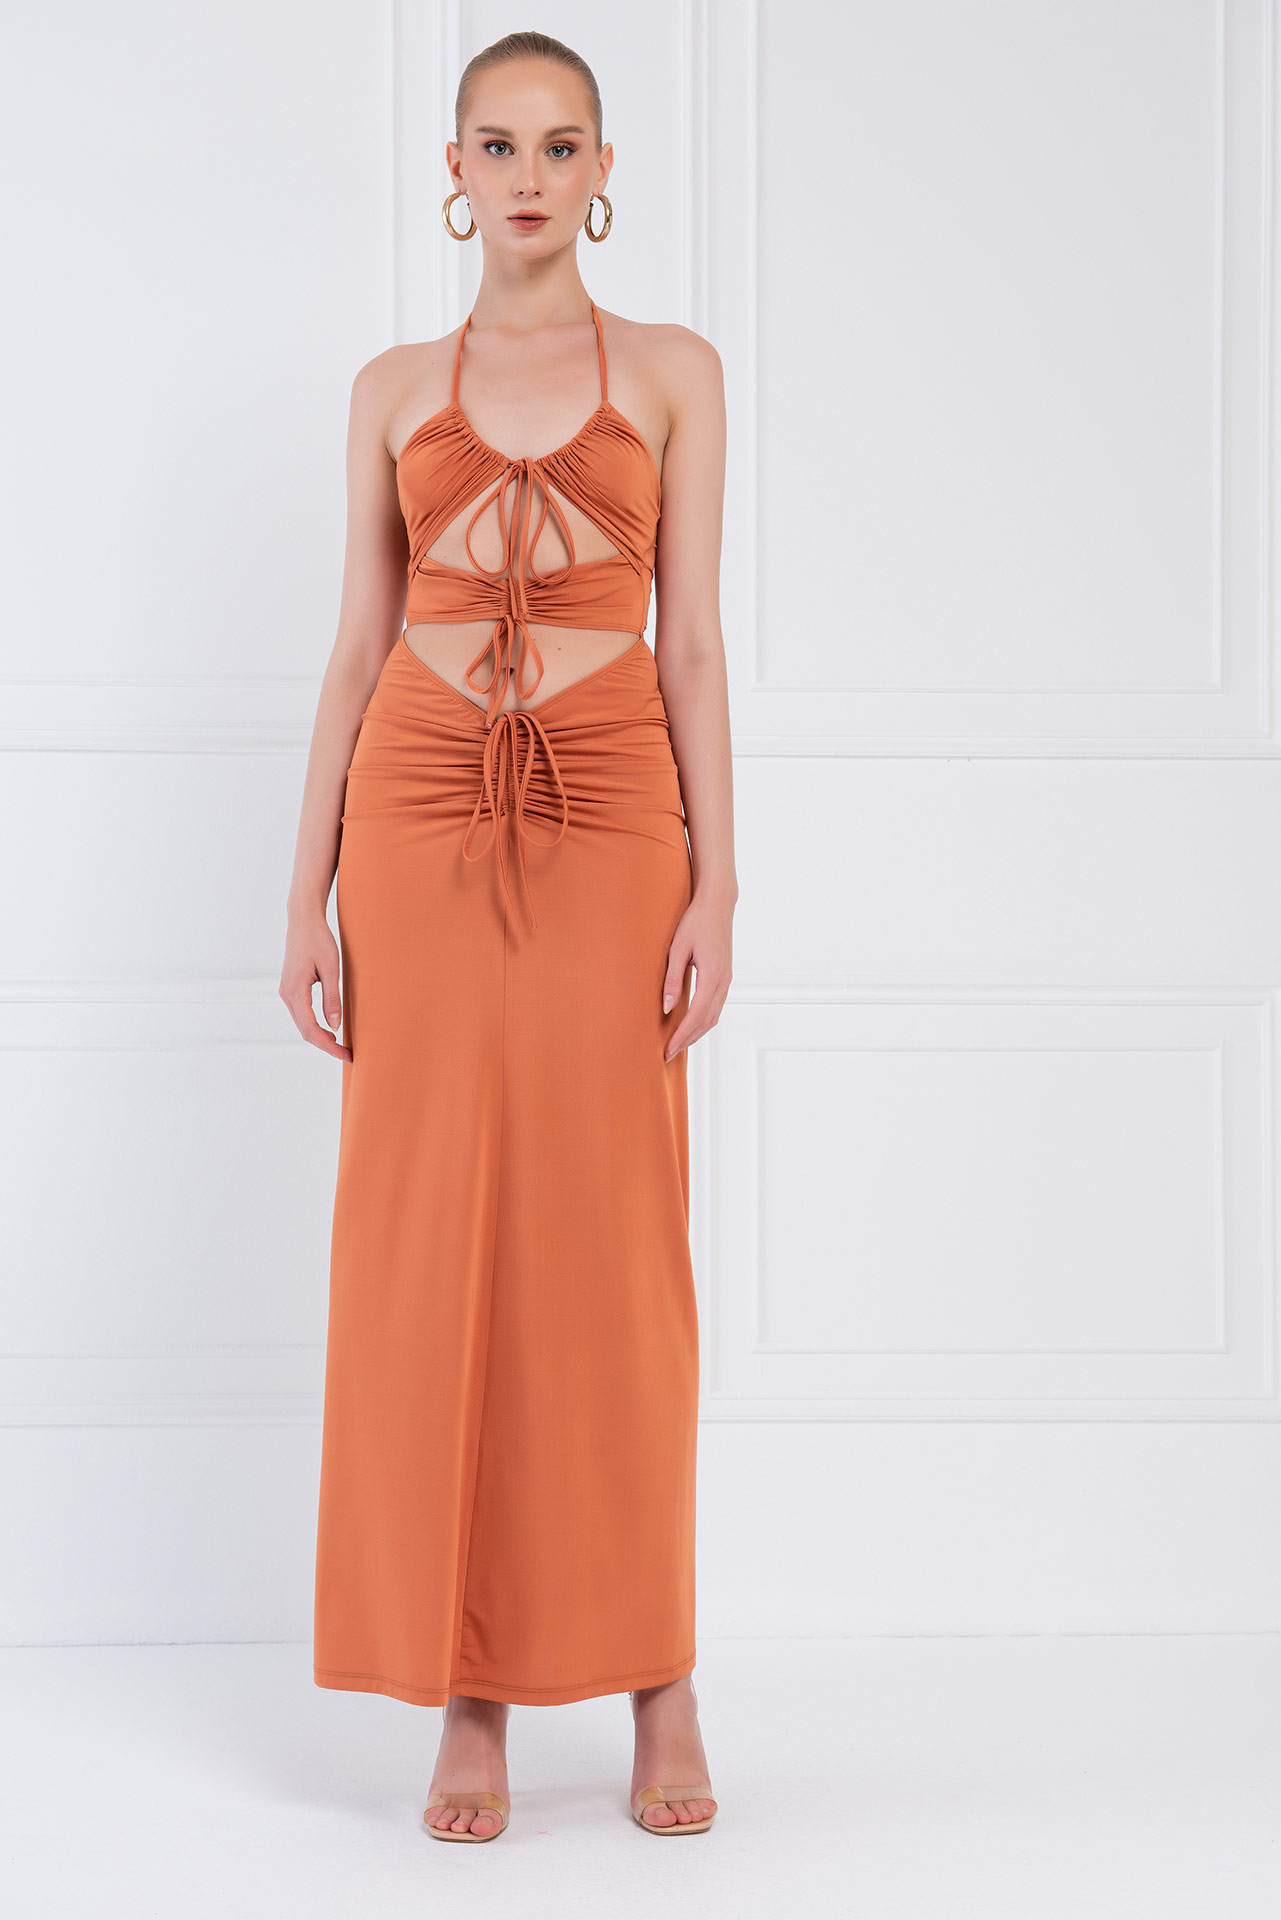 Wholesale Ochre Self-Tie Ruched Maxi Dress